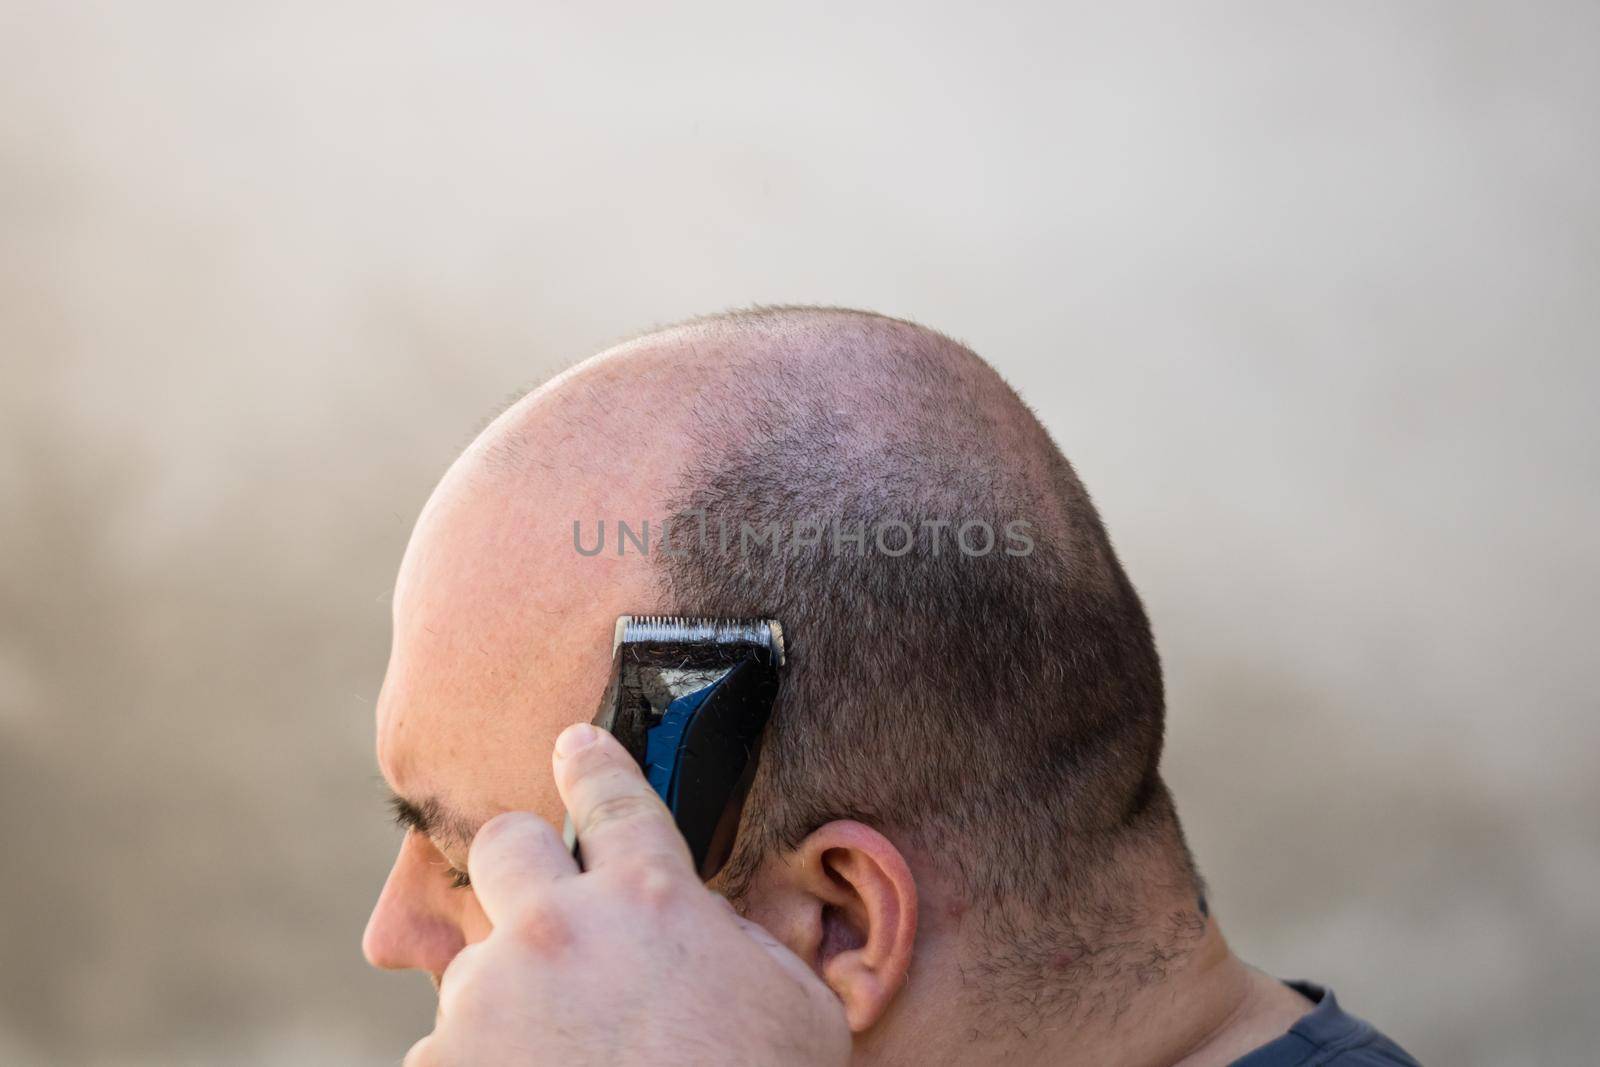 Male shaving or trimming his hair using a hair clipper or electric razor